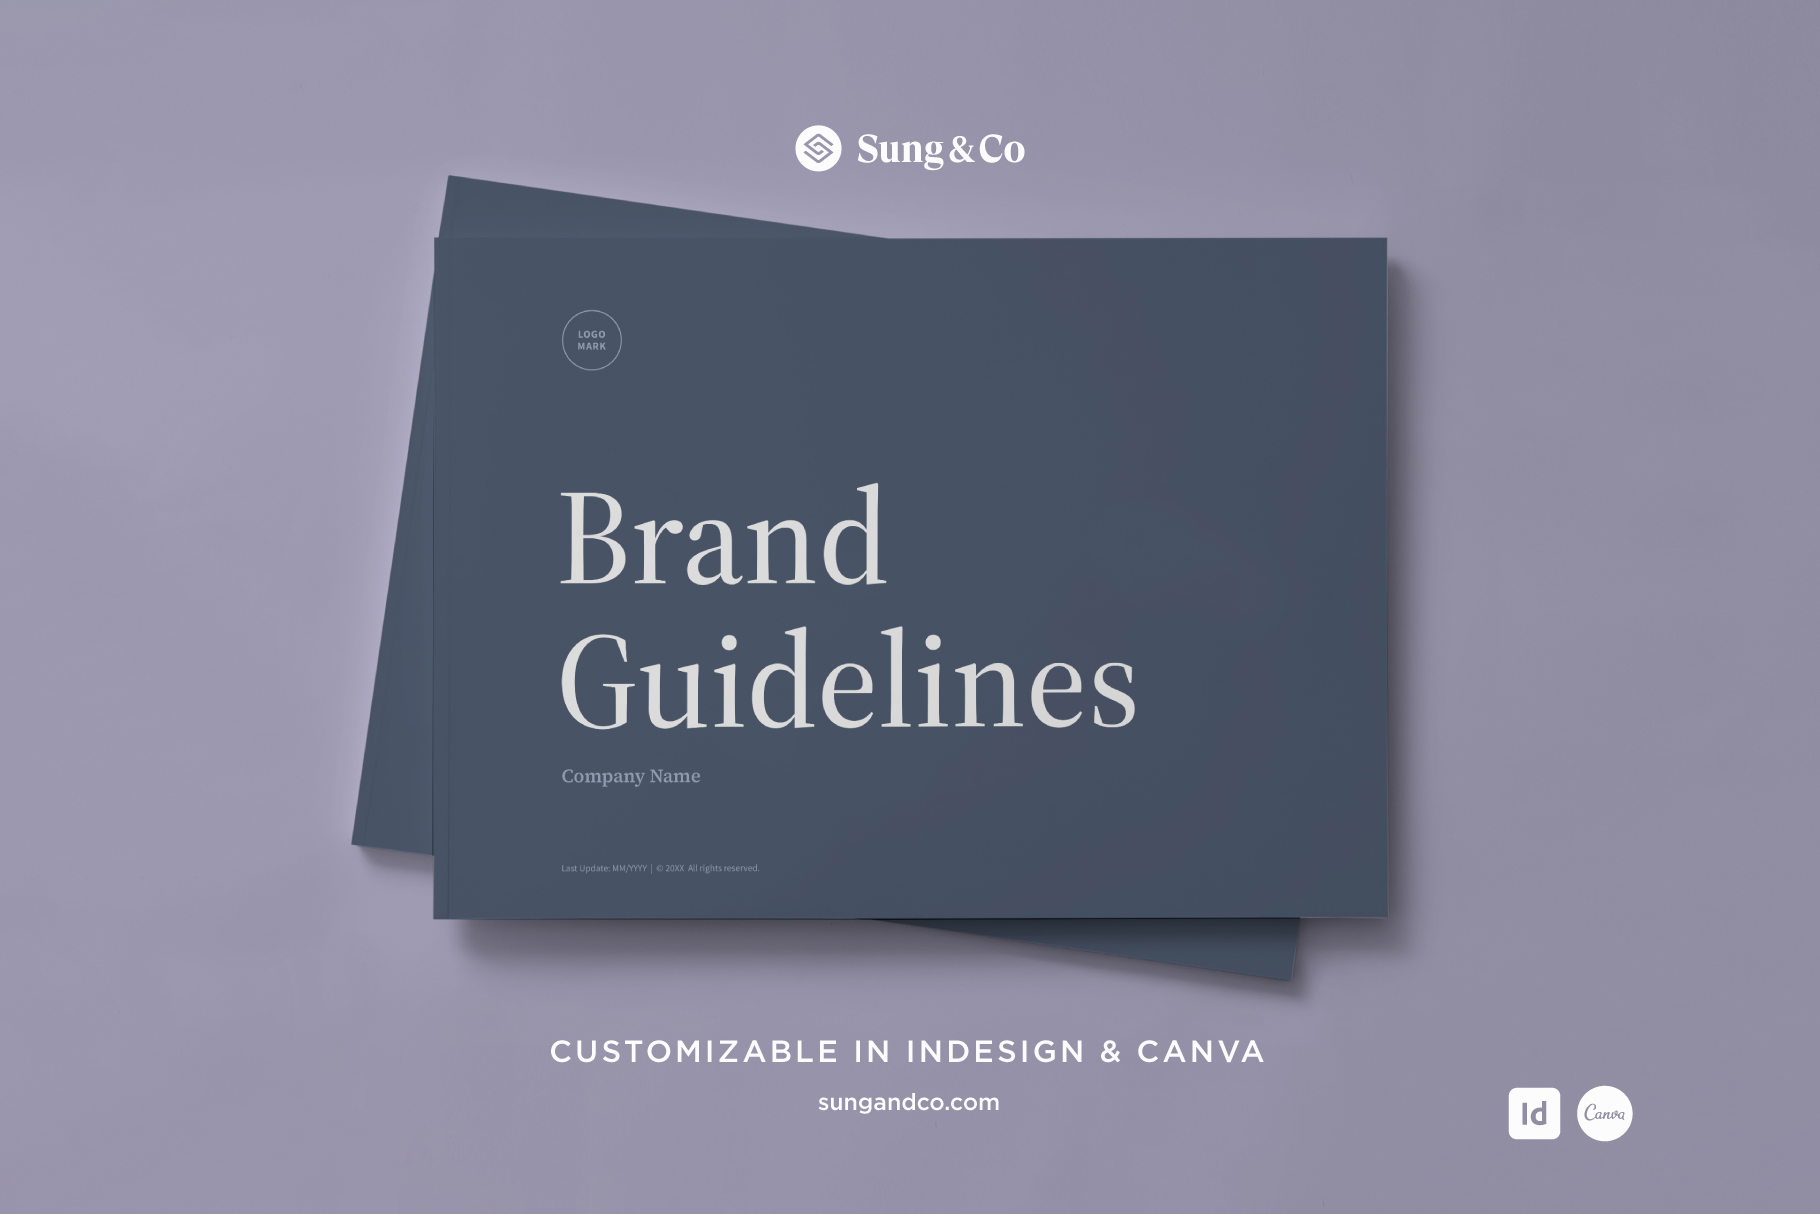 Brand Guide Template created by Sung & Co